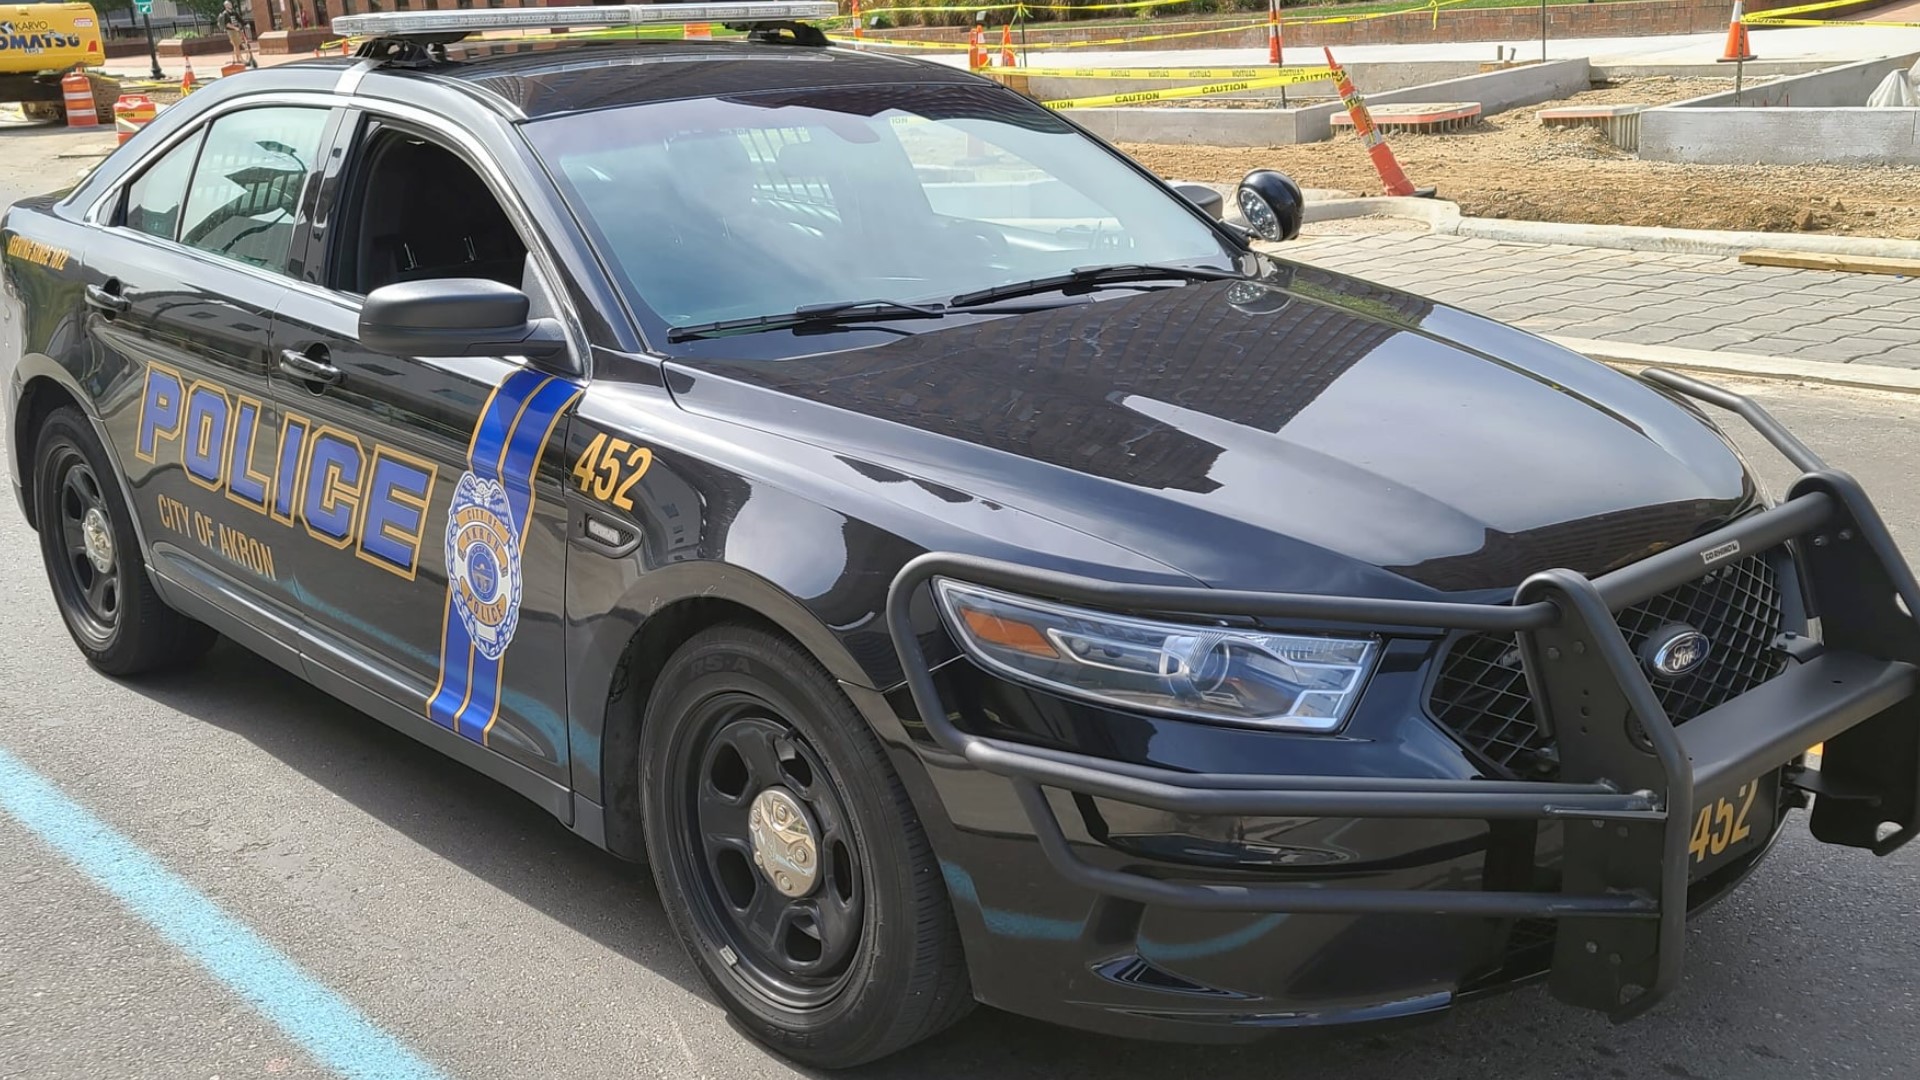 Akron police: Search on for suspects who shot at officer | wkyc.com